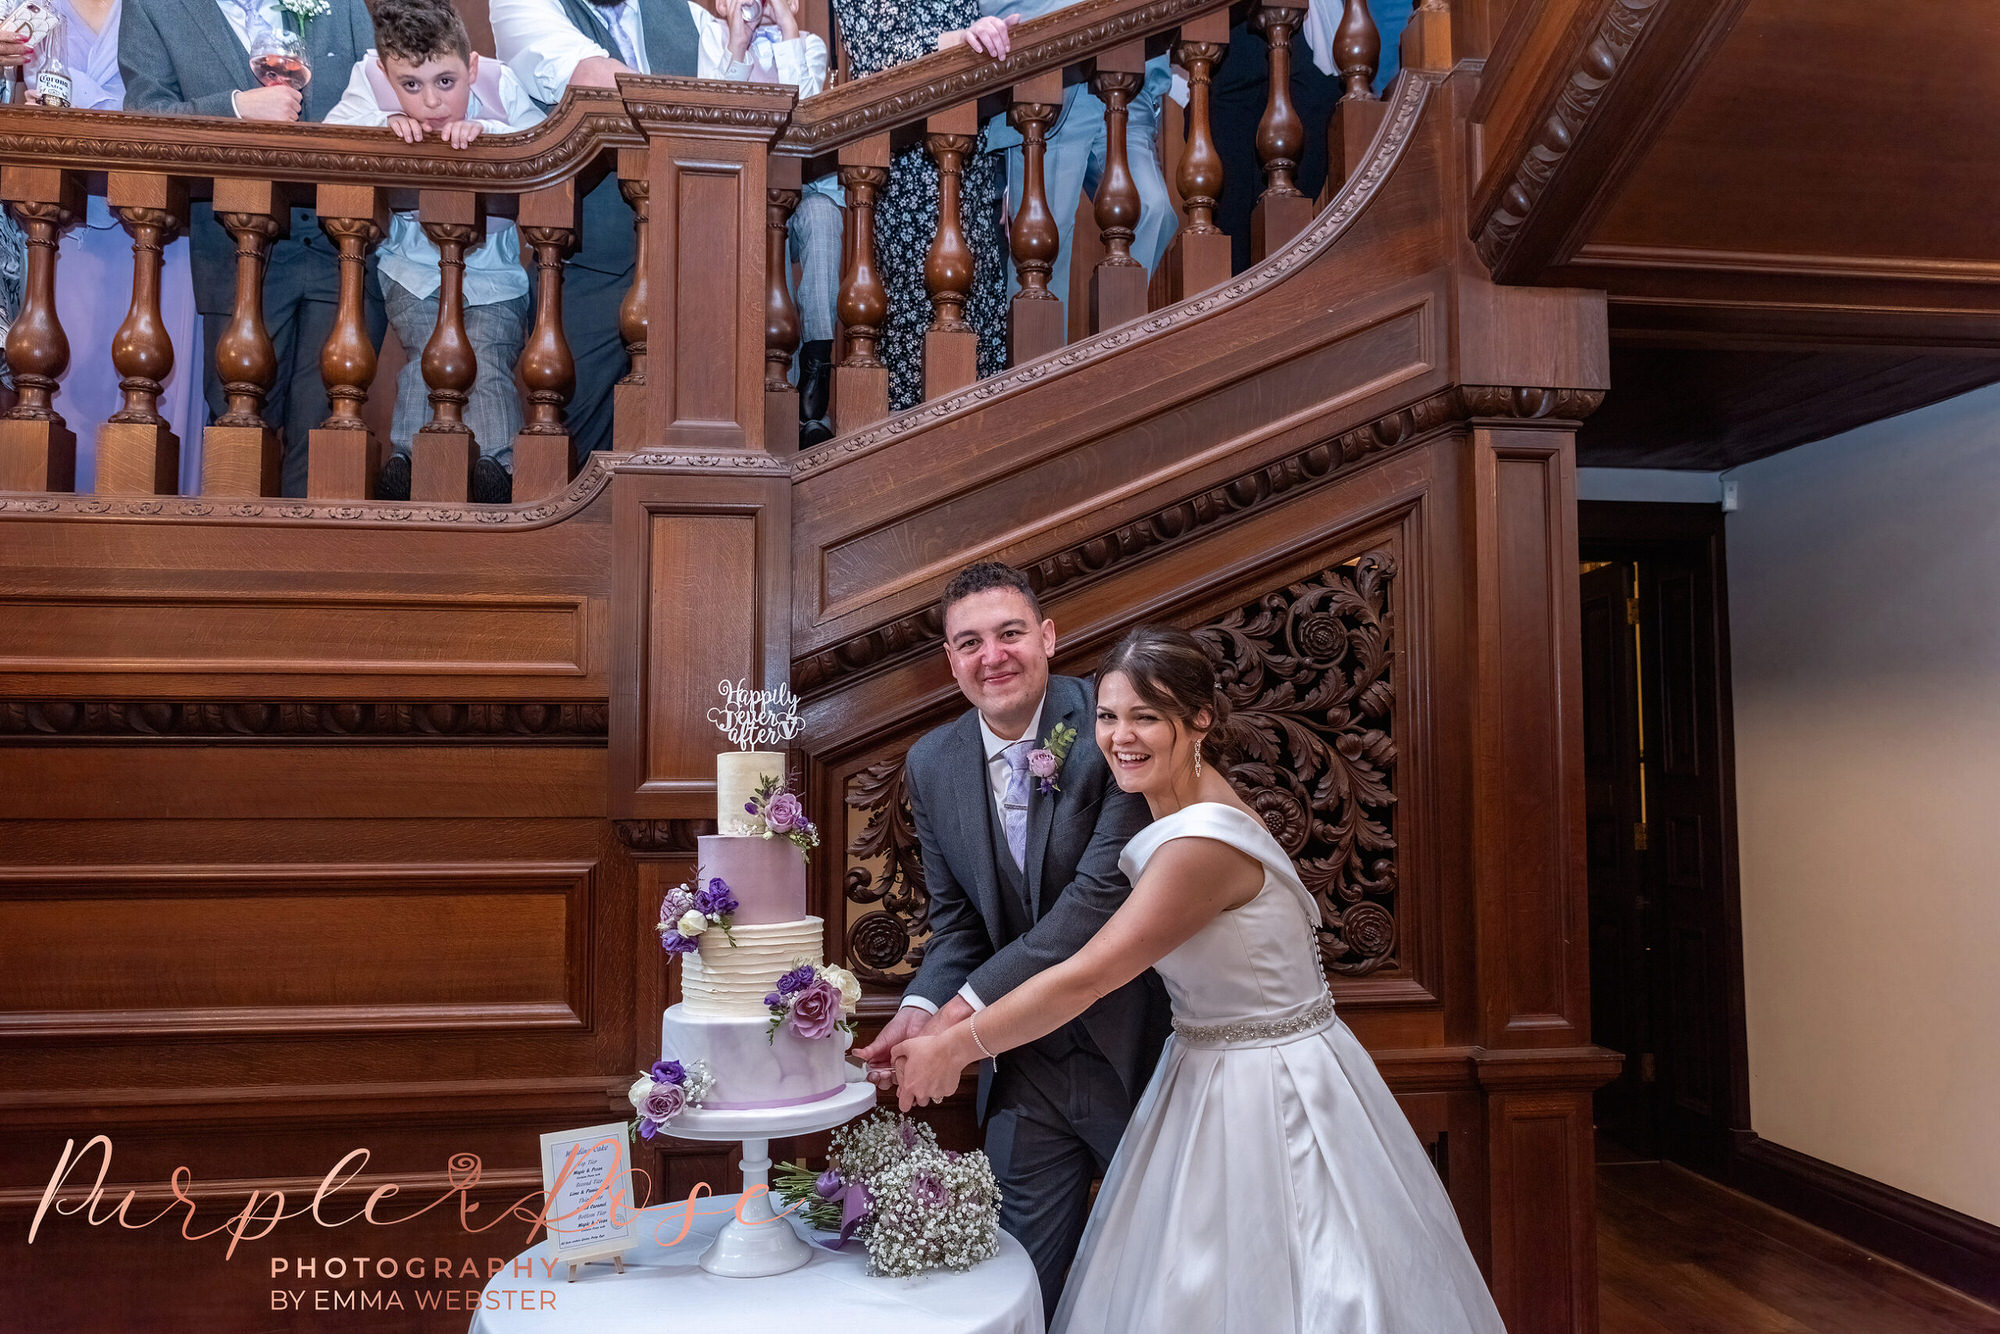 Bride and groom cutting their wedding cake by staircase